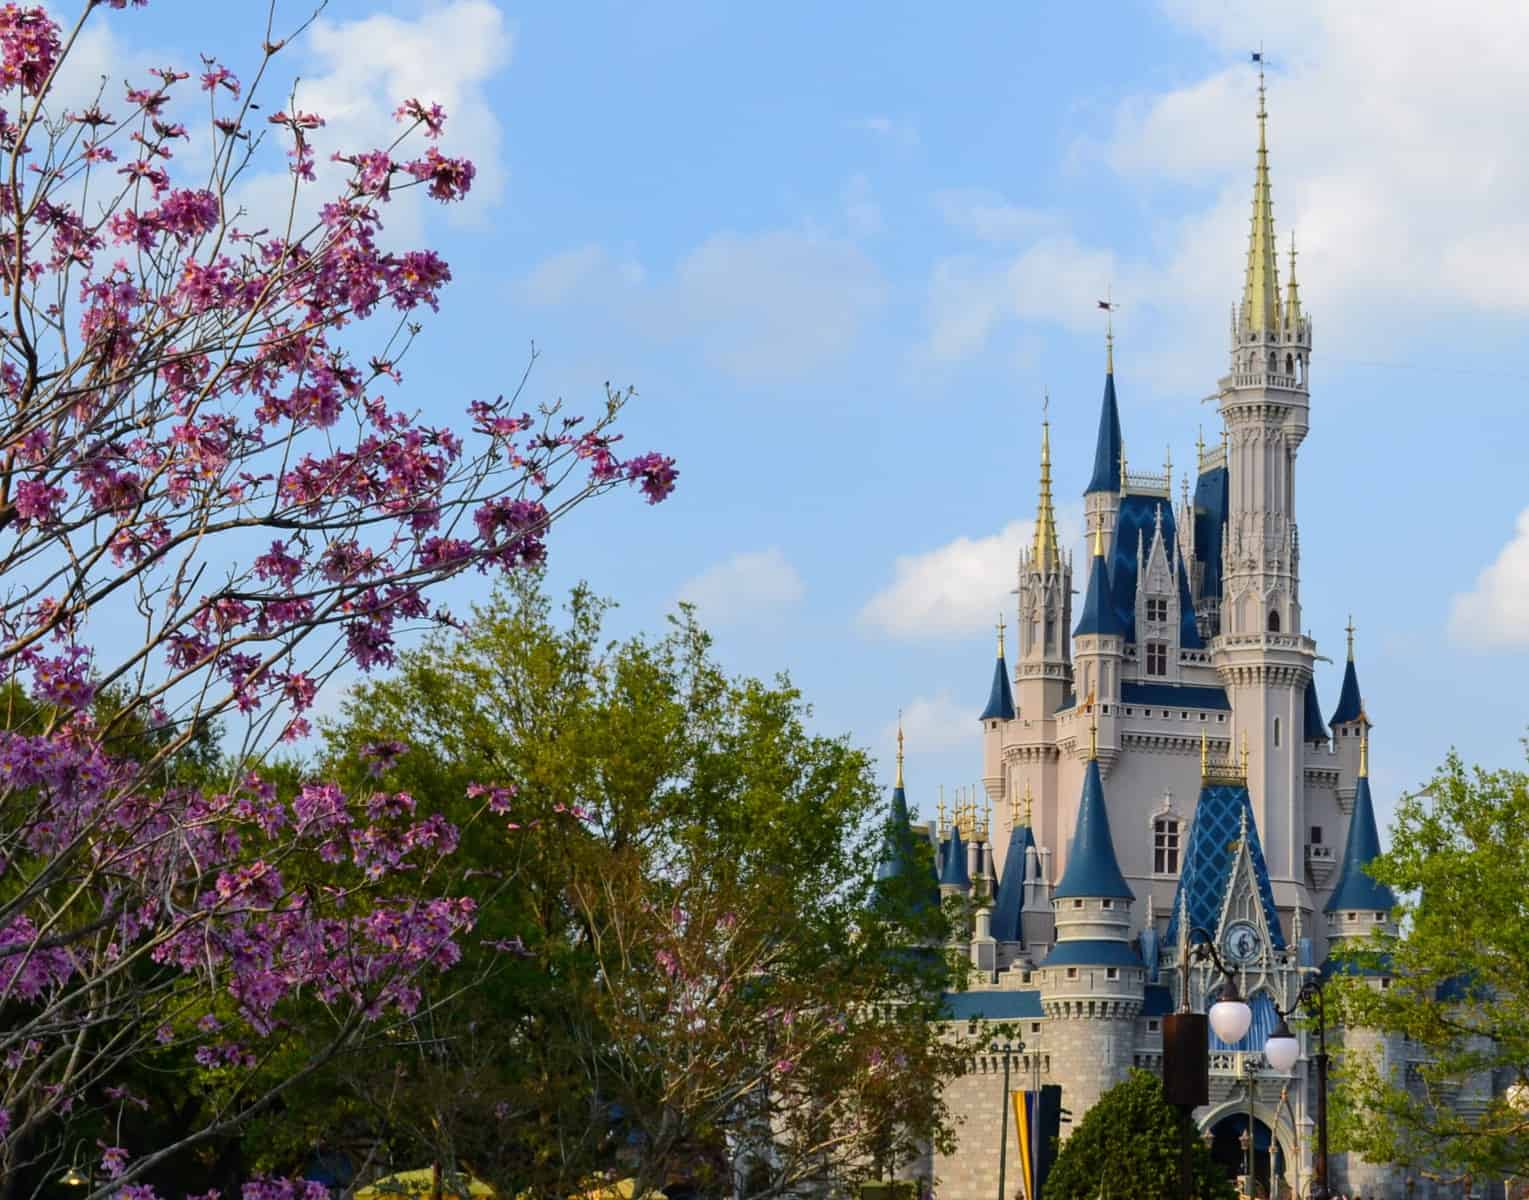 Walt Disney World Annual Passes & Park Hopper Add-Ons Increase In Price